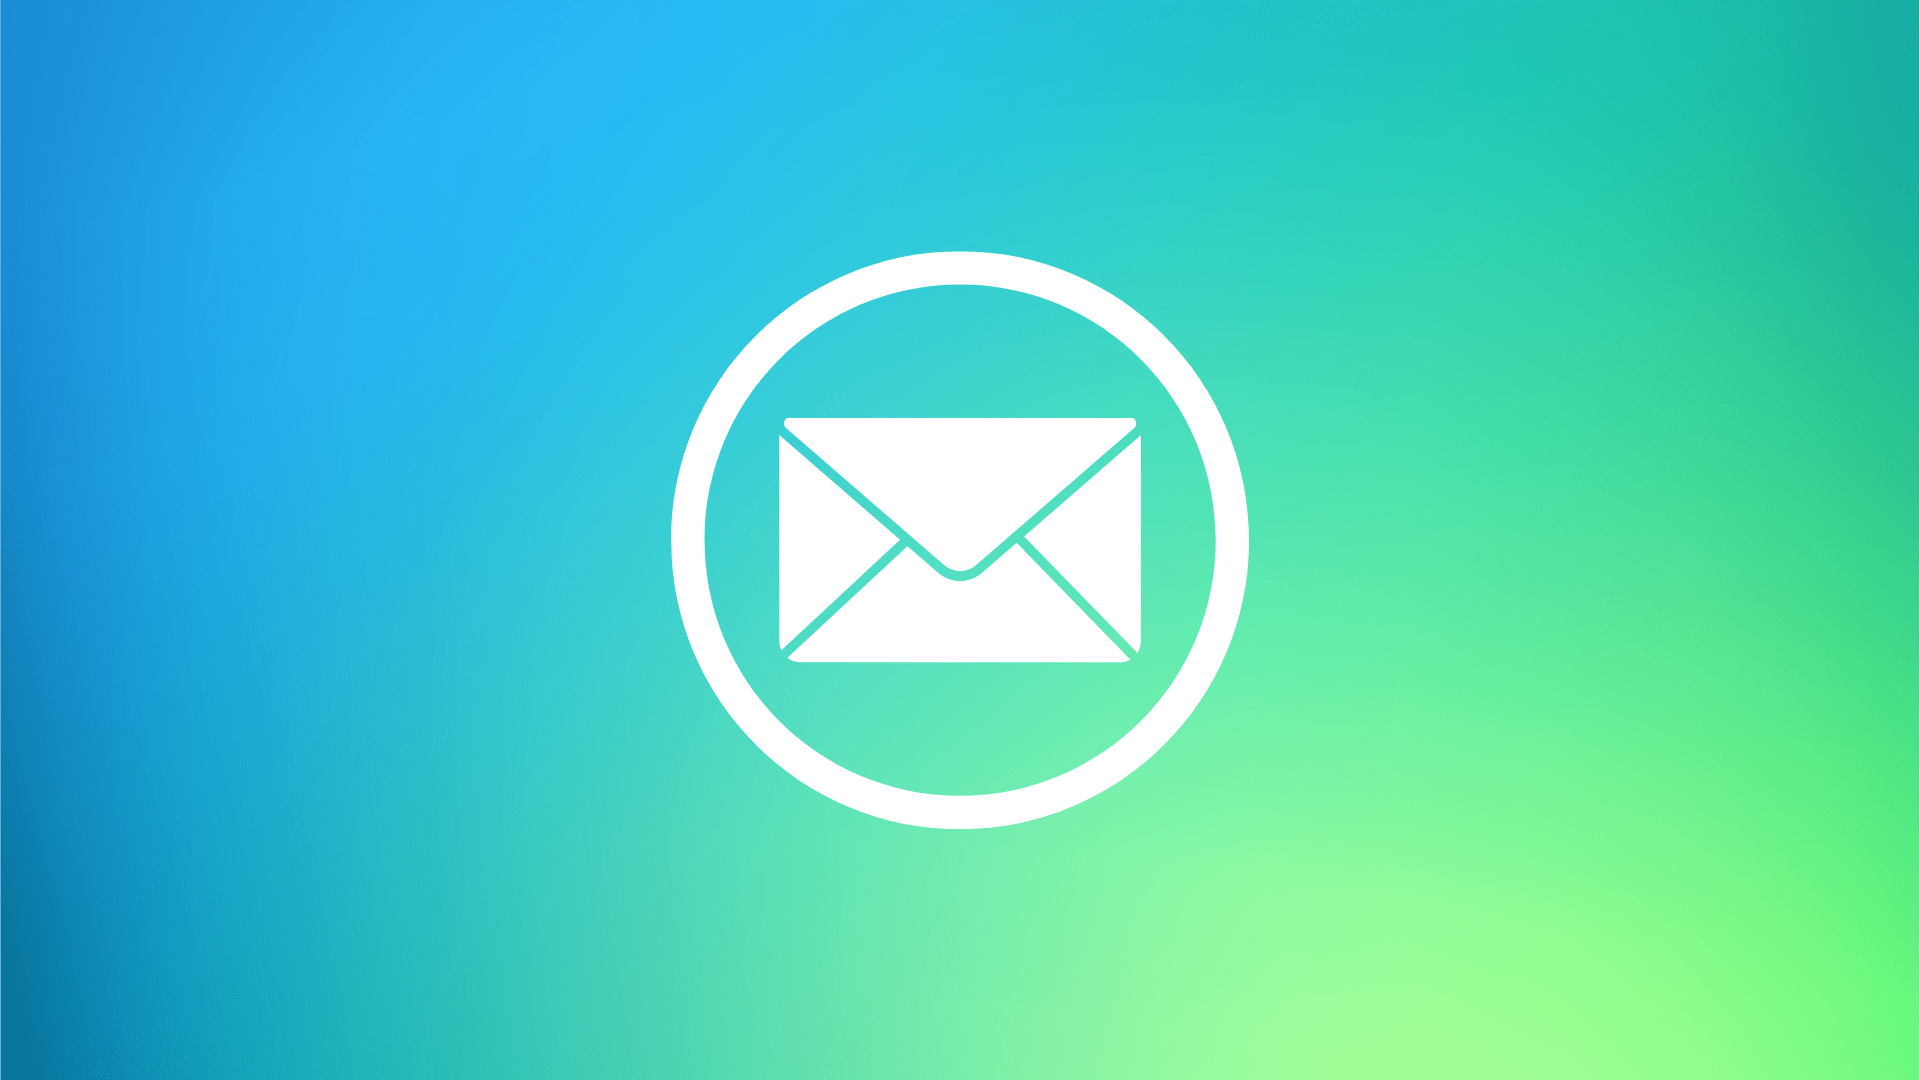 Email actions